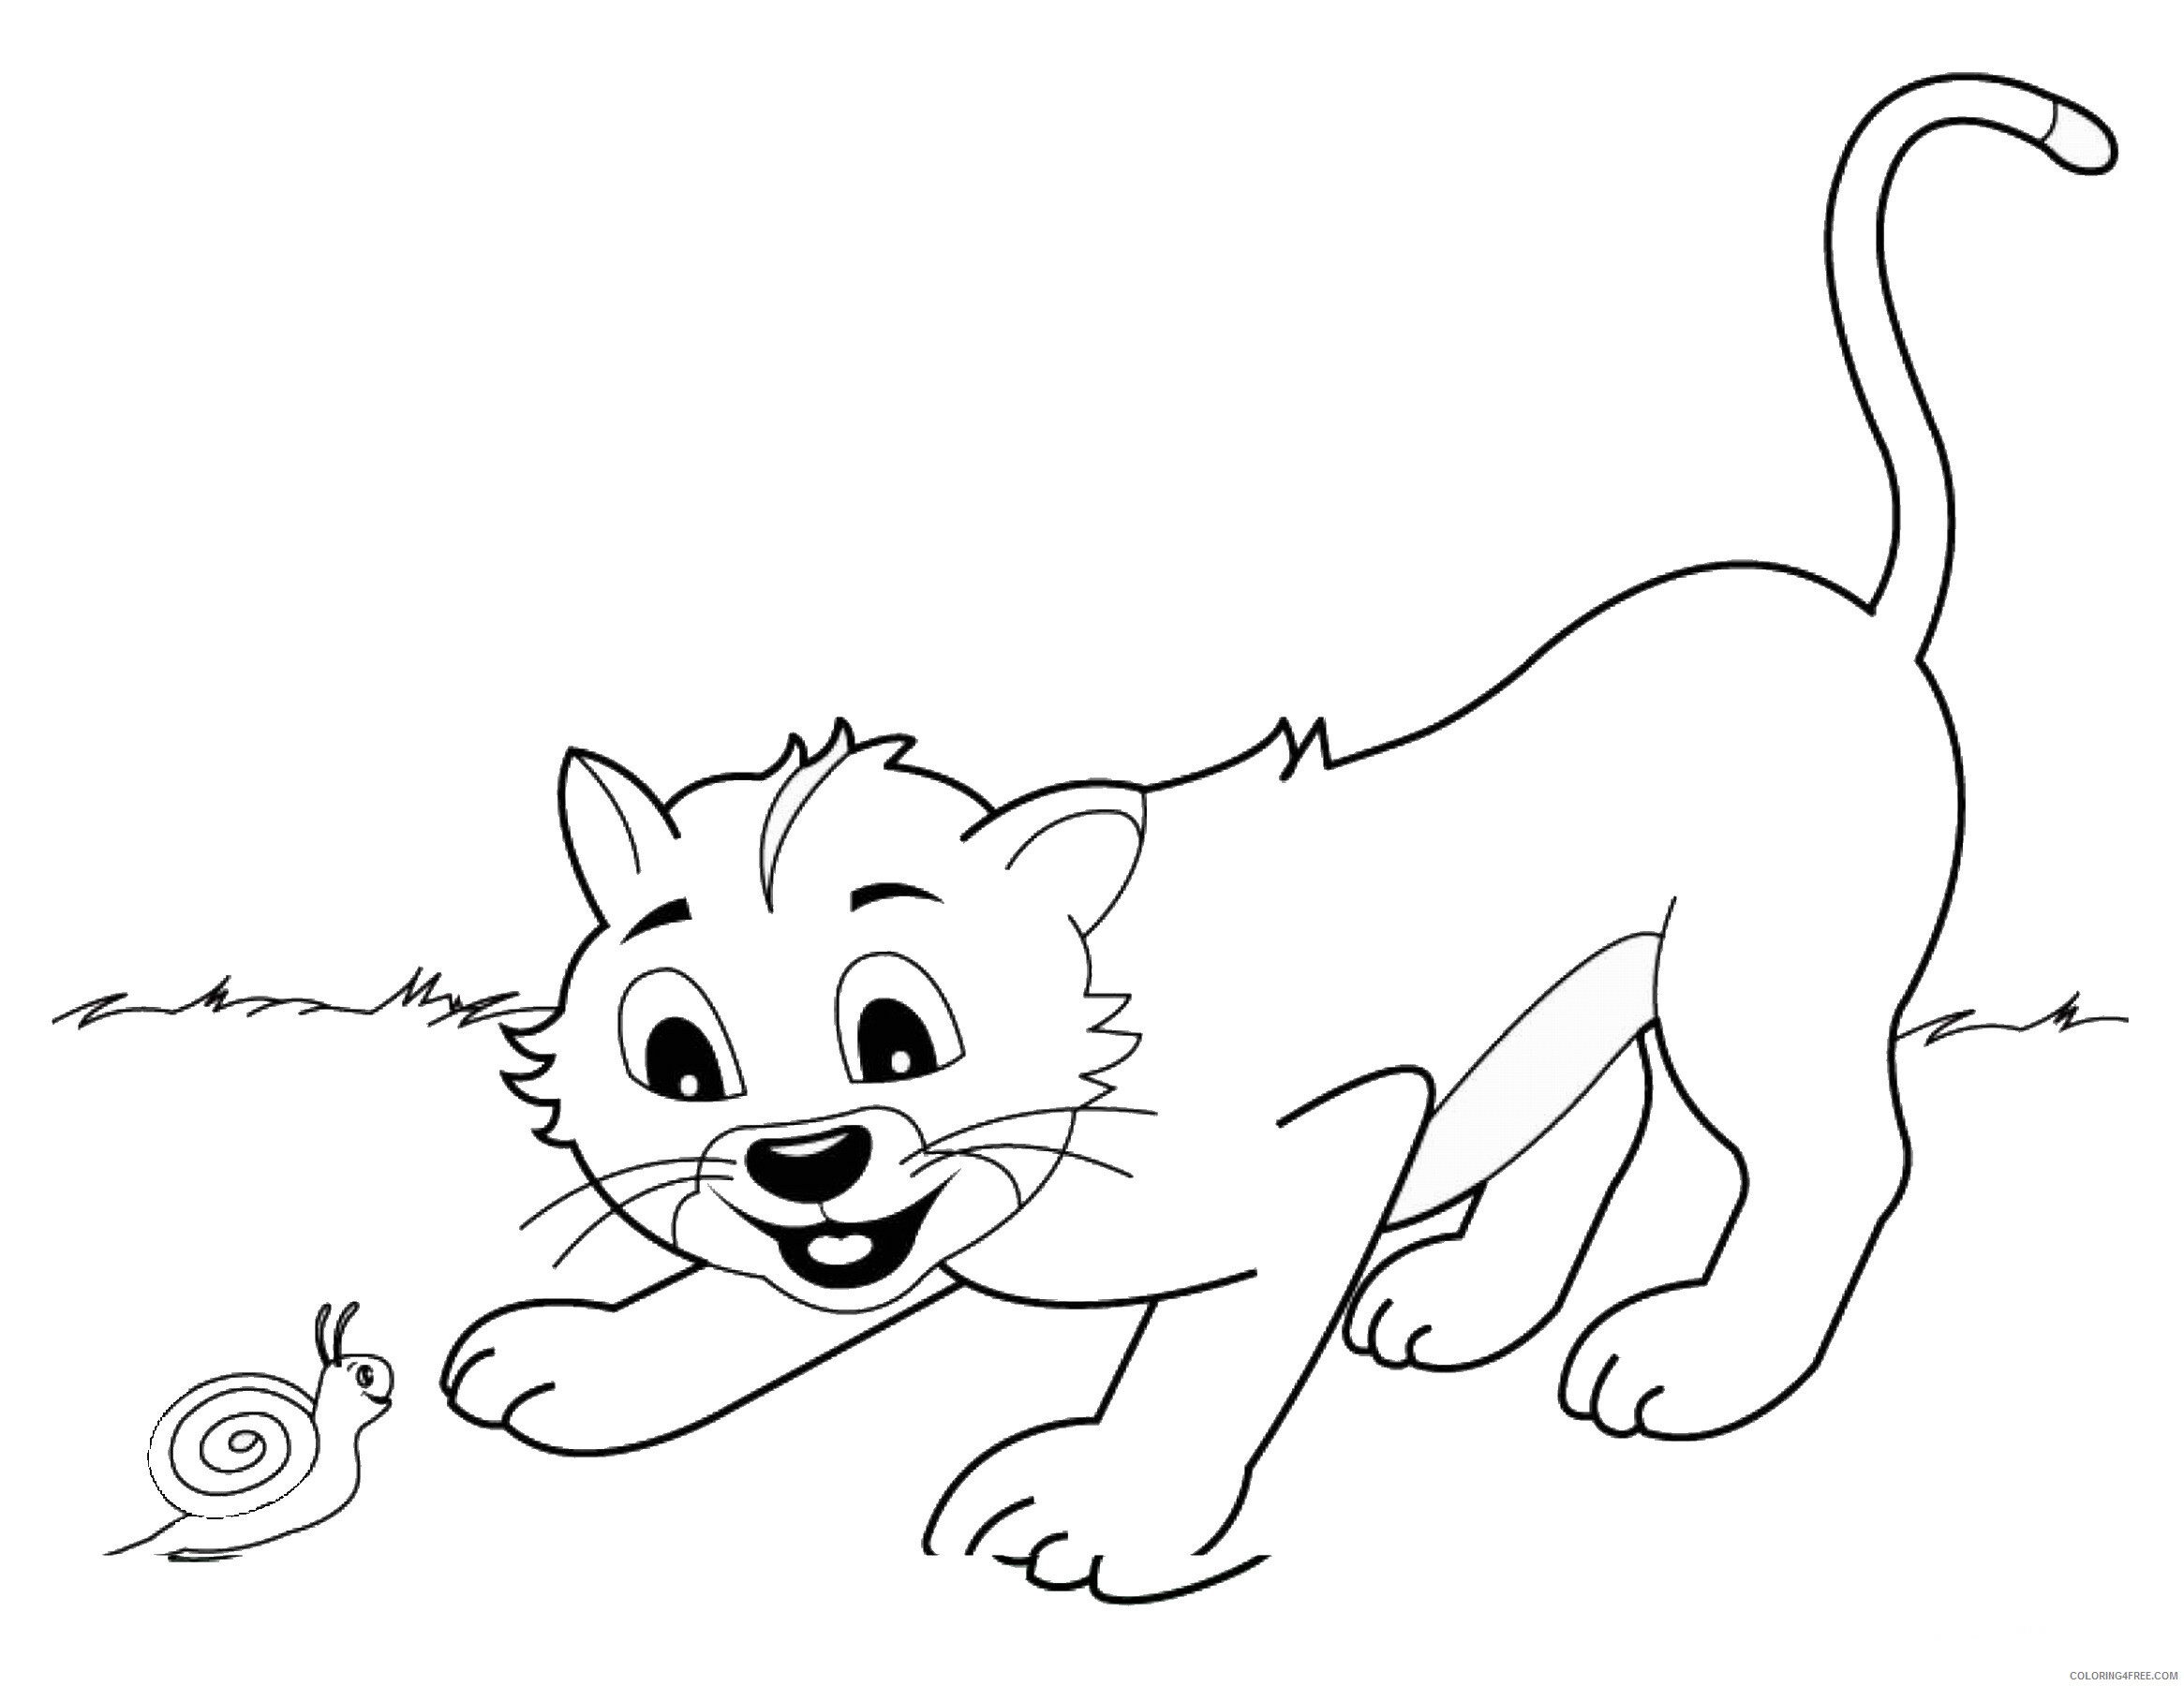 Cat Coloring Pages Animal Printable Sheets cats_30 2021 0824 Coloring4free